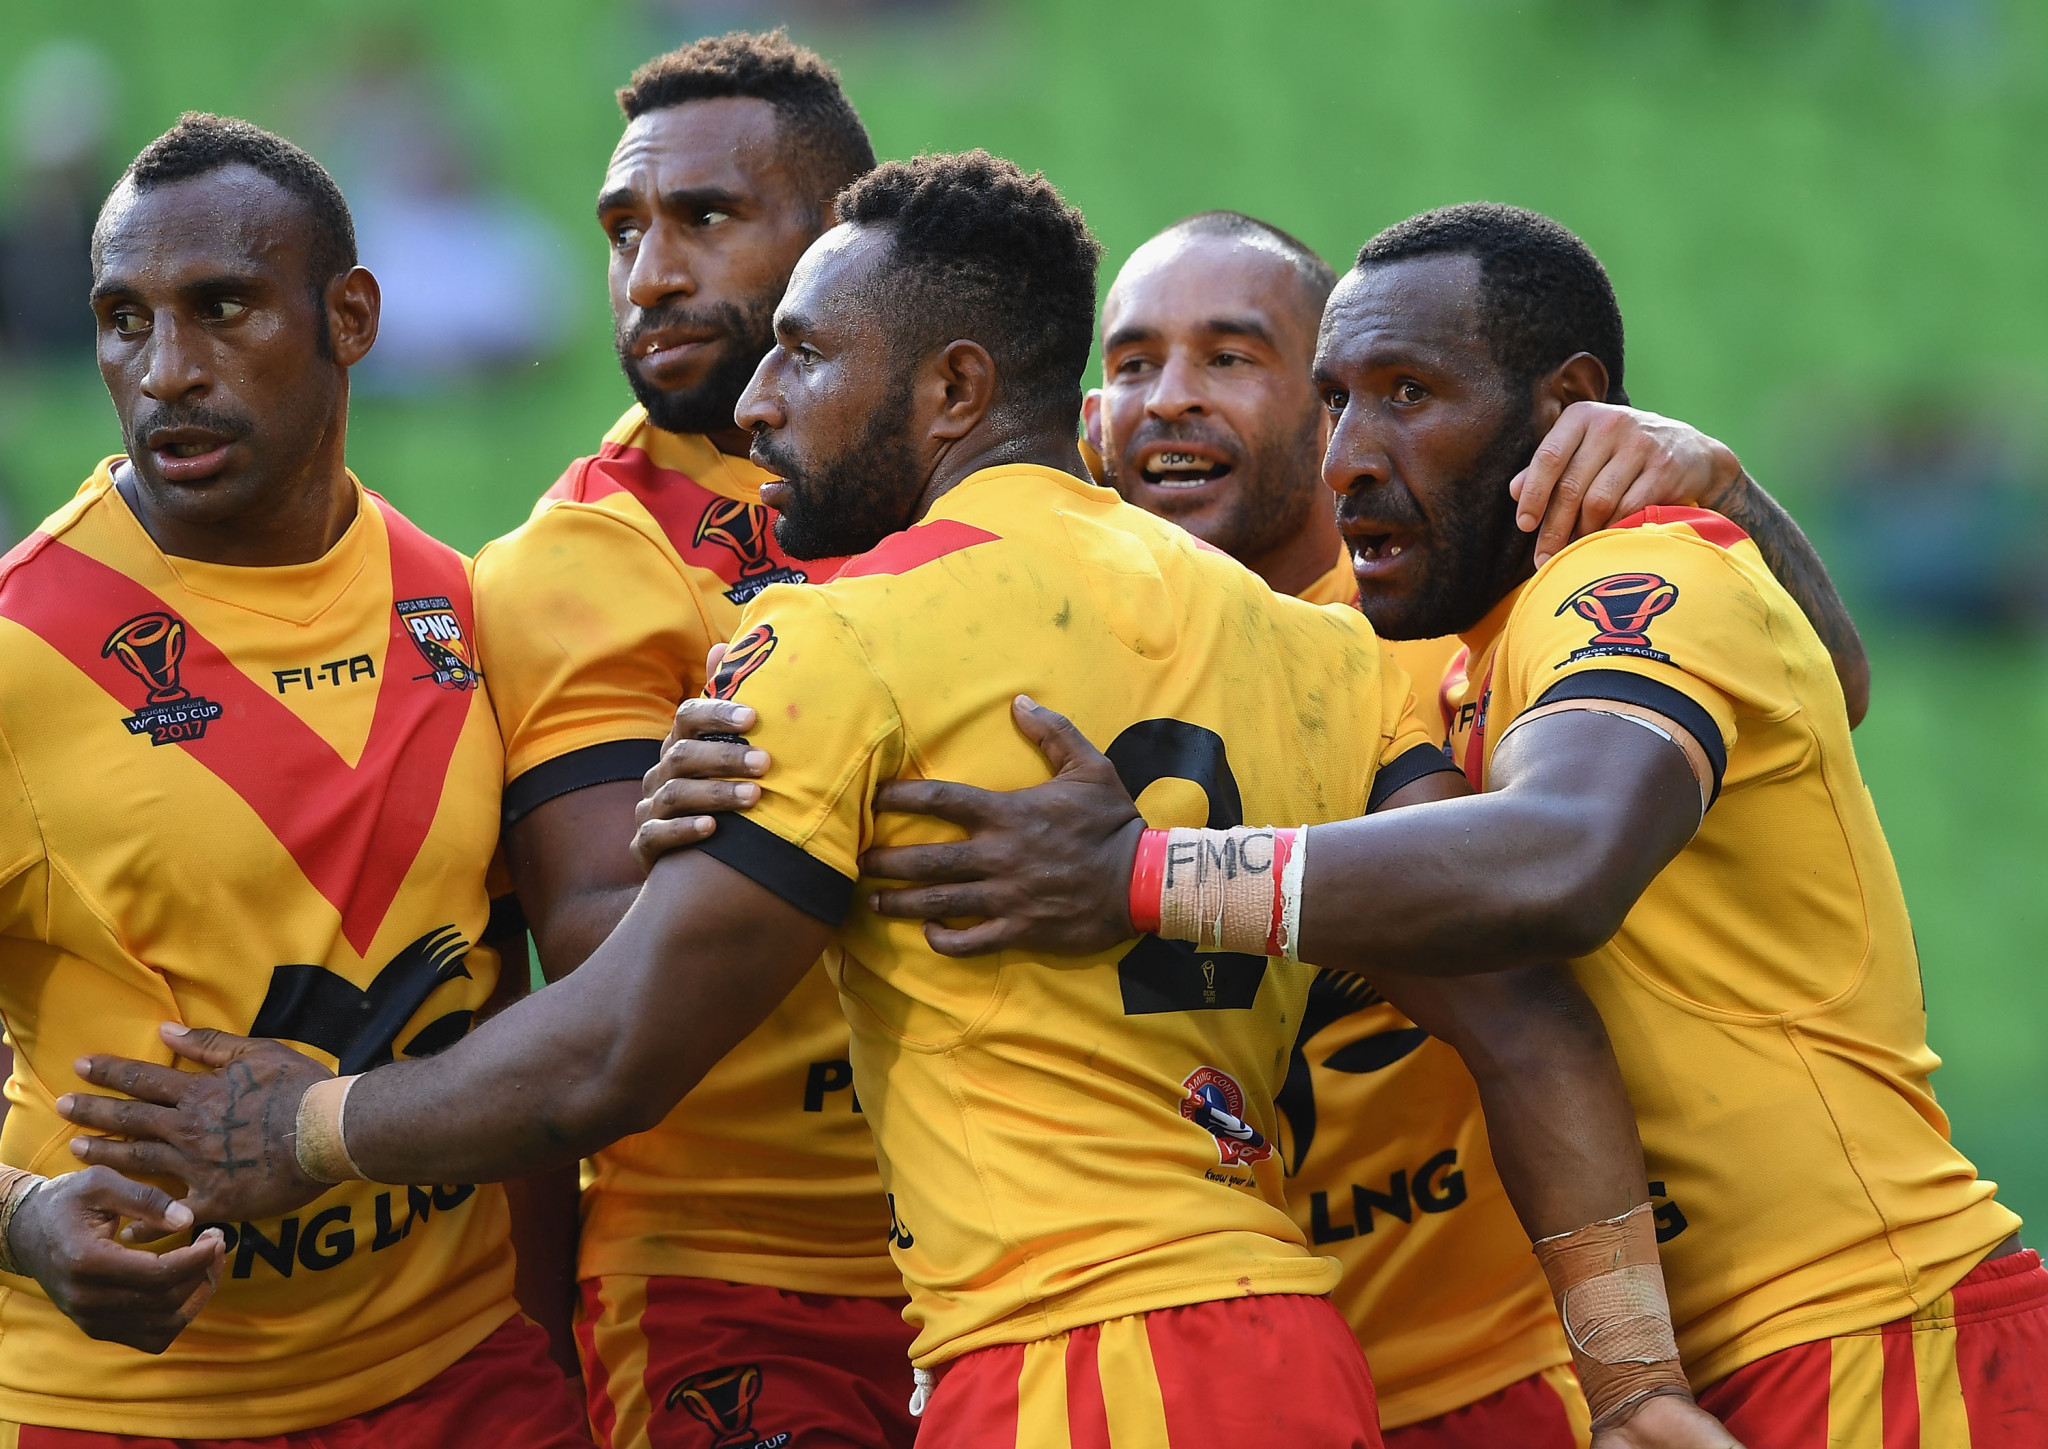 Papua New Guinea reached the quarter-finals of the 2017 Rugby League World Cup ©Getty Images